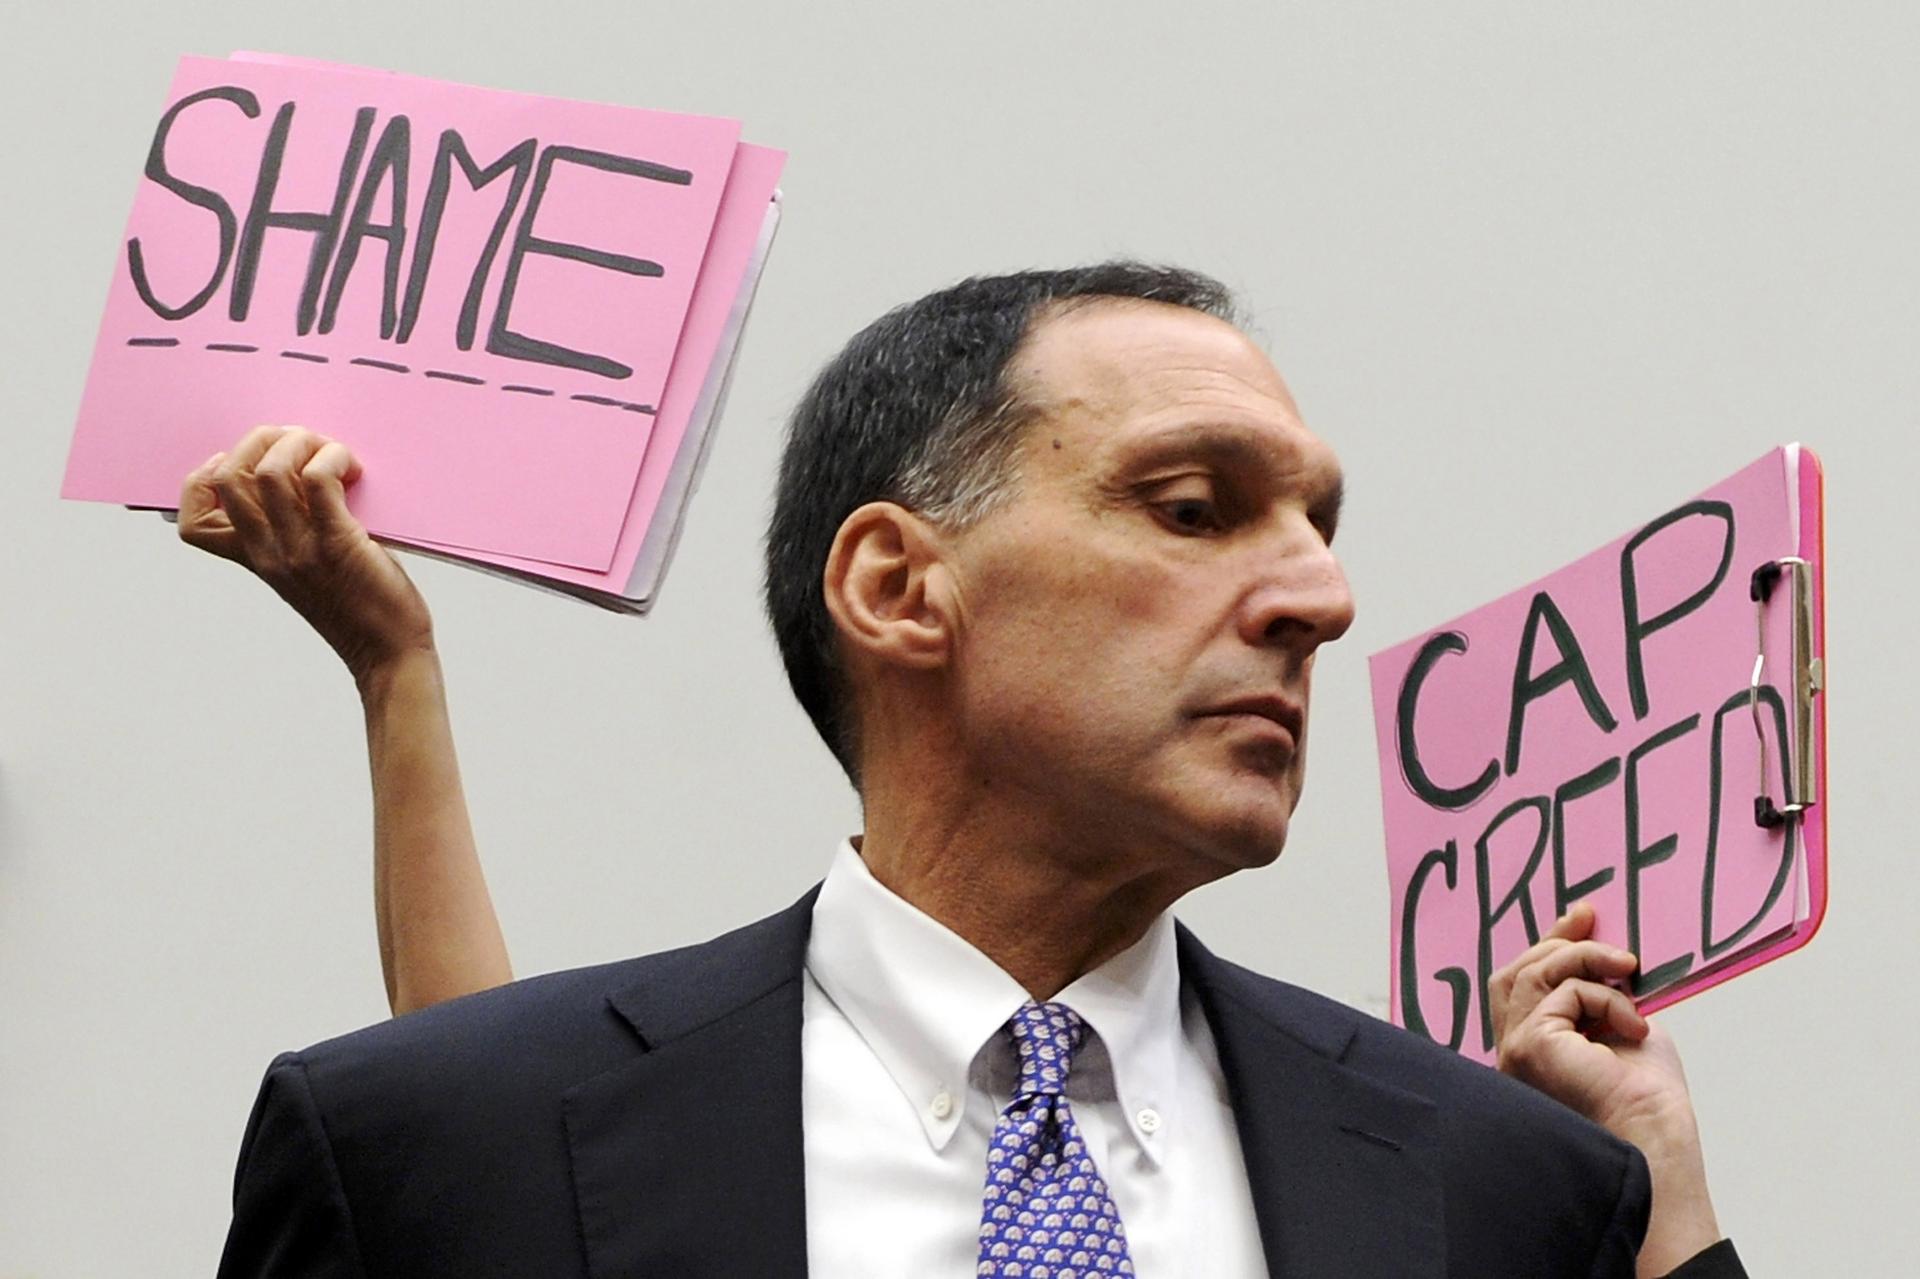 Richard Fuld, Lehman's chief executive, faced protests when he testified to Congress in 2008. Neither Fuld nor any other senior executive from a Wall Street bank has faced criminal charges resulting from the crisis. Photo: Reuters